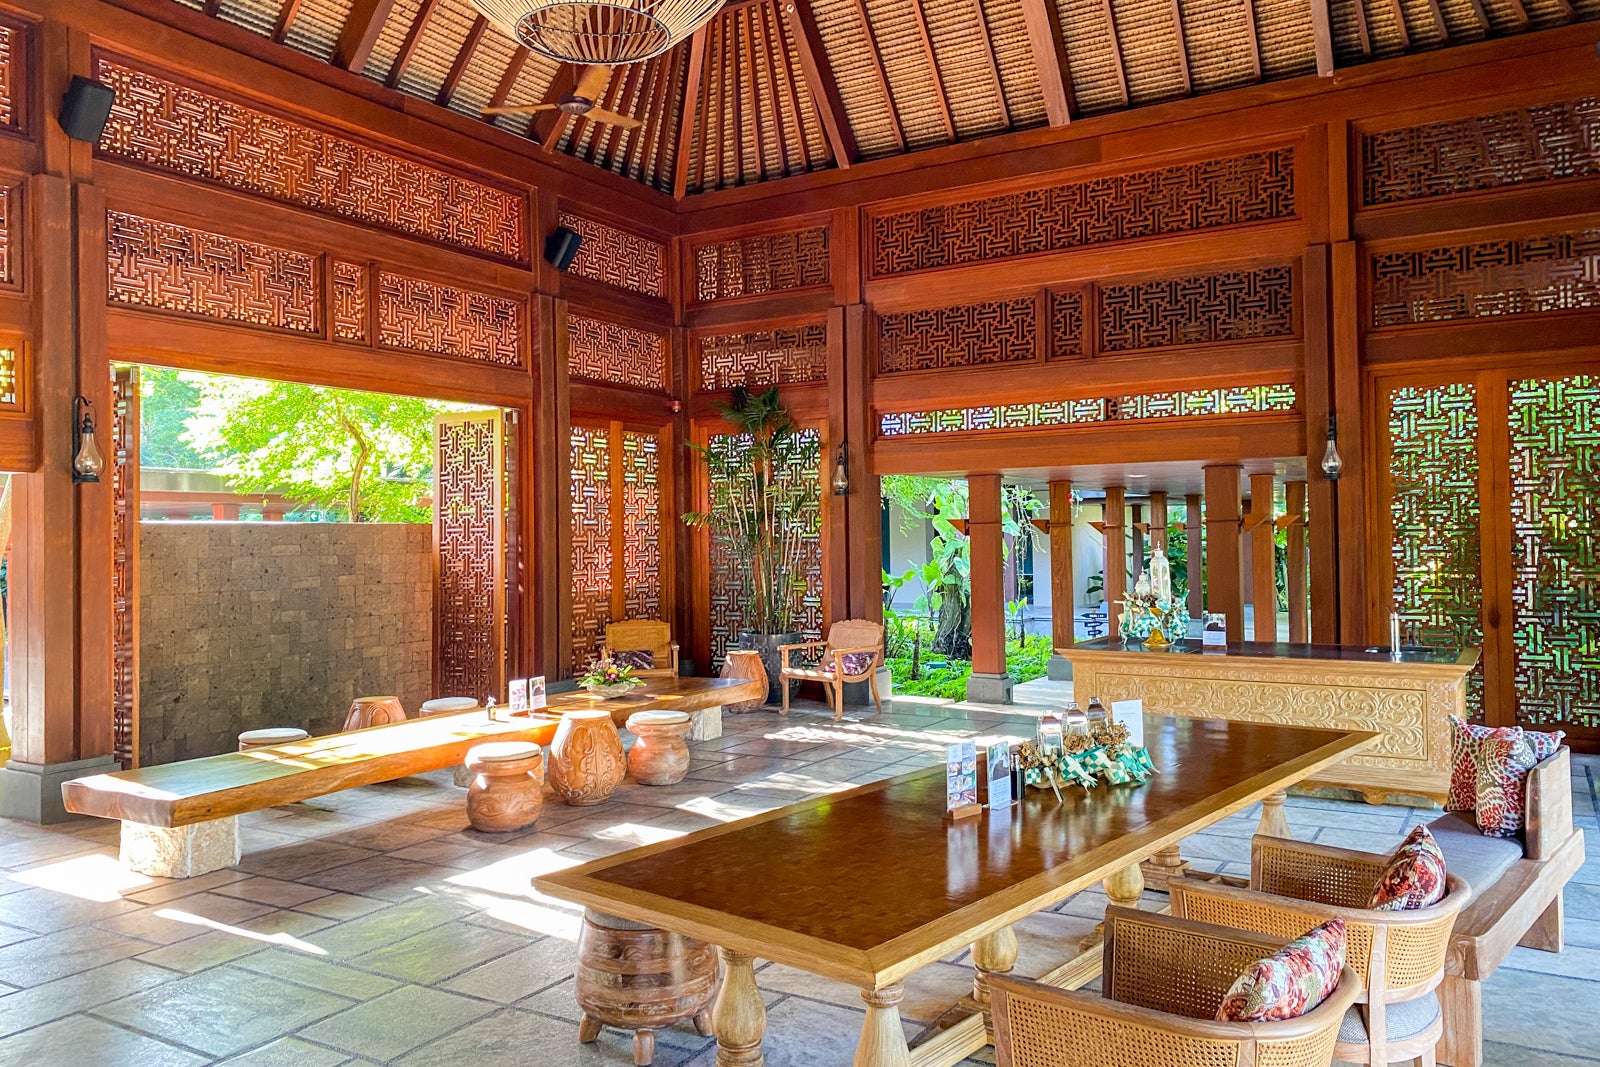 Andaz Highlights Bali's Very Own Traditional World